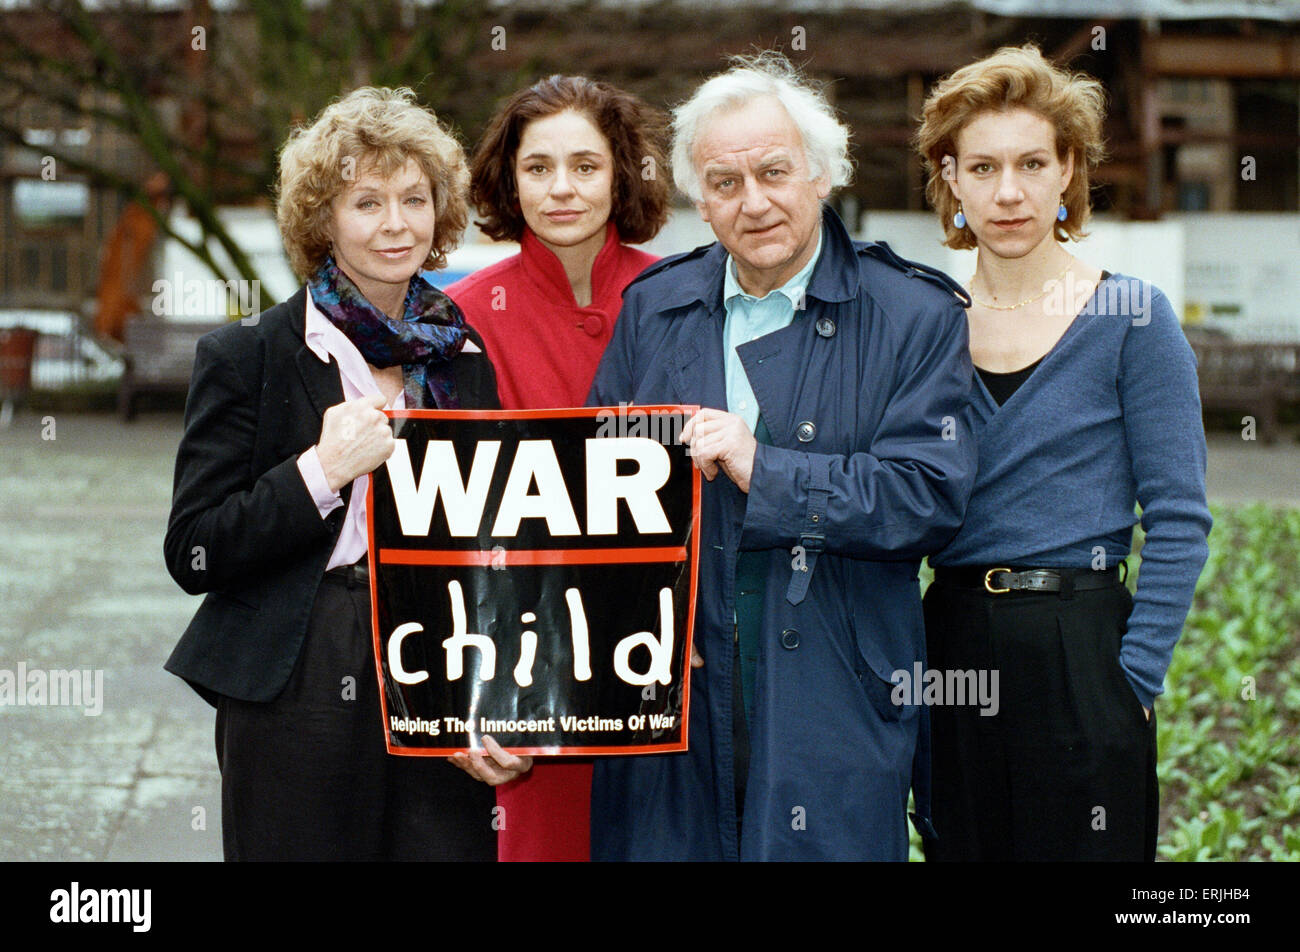 Supporters of the War Child Charity John Shaw (third from left) and Juliet Stevenson (right). War Child was founded in 1993 by British filmmakers Bill Leeson and David Wilson when they returned from filming in the war in former Yugoslavia. In 1993 the first War Child convoy with equipment and food to run a mobile bakery travelled to former Yugoslavia. War Child Netherlands was founded shortly after in 1994 by Willemijn Verloop when she met Music Therapy professor Nigel Osborne during the war in Bosnia; War Child Holland programmes have since always focussed on psychosocial aid. War Child Stock Photo